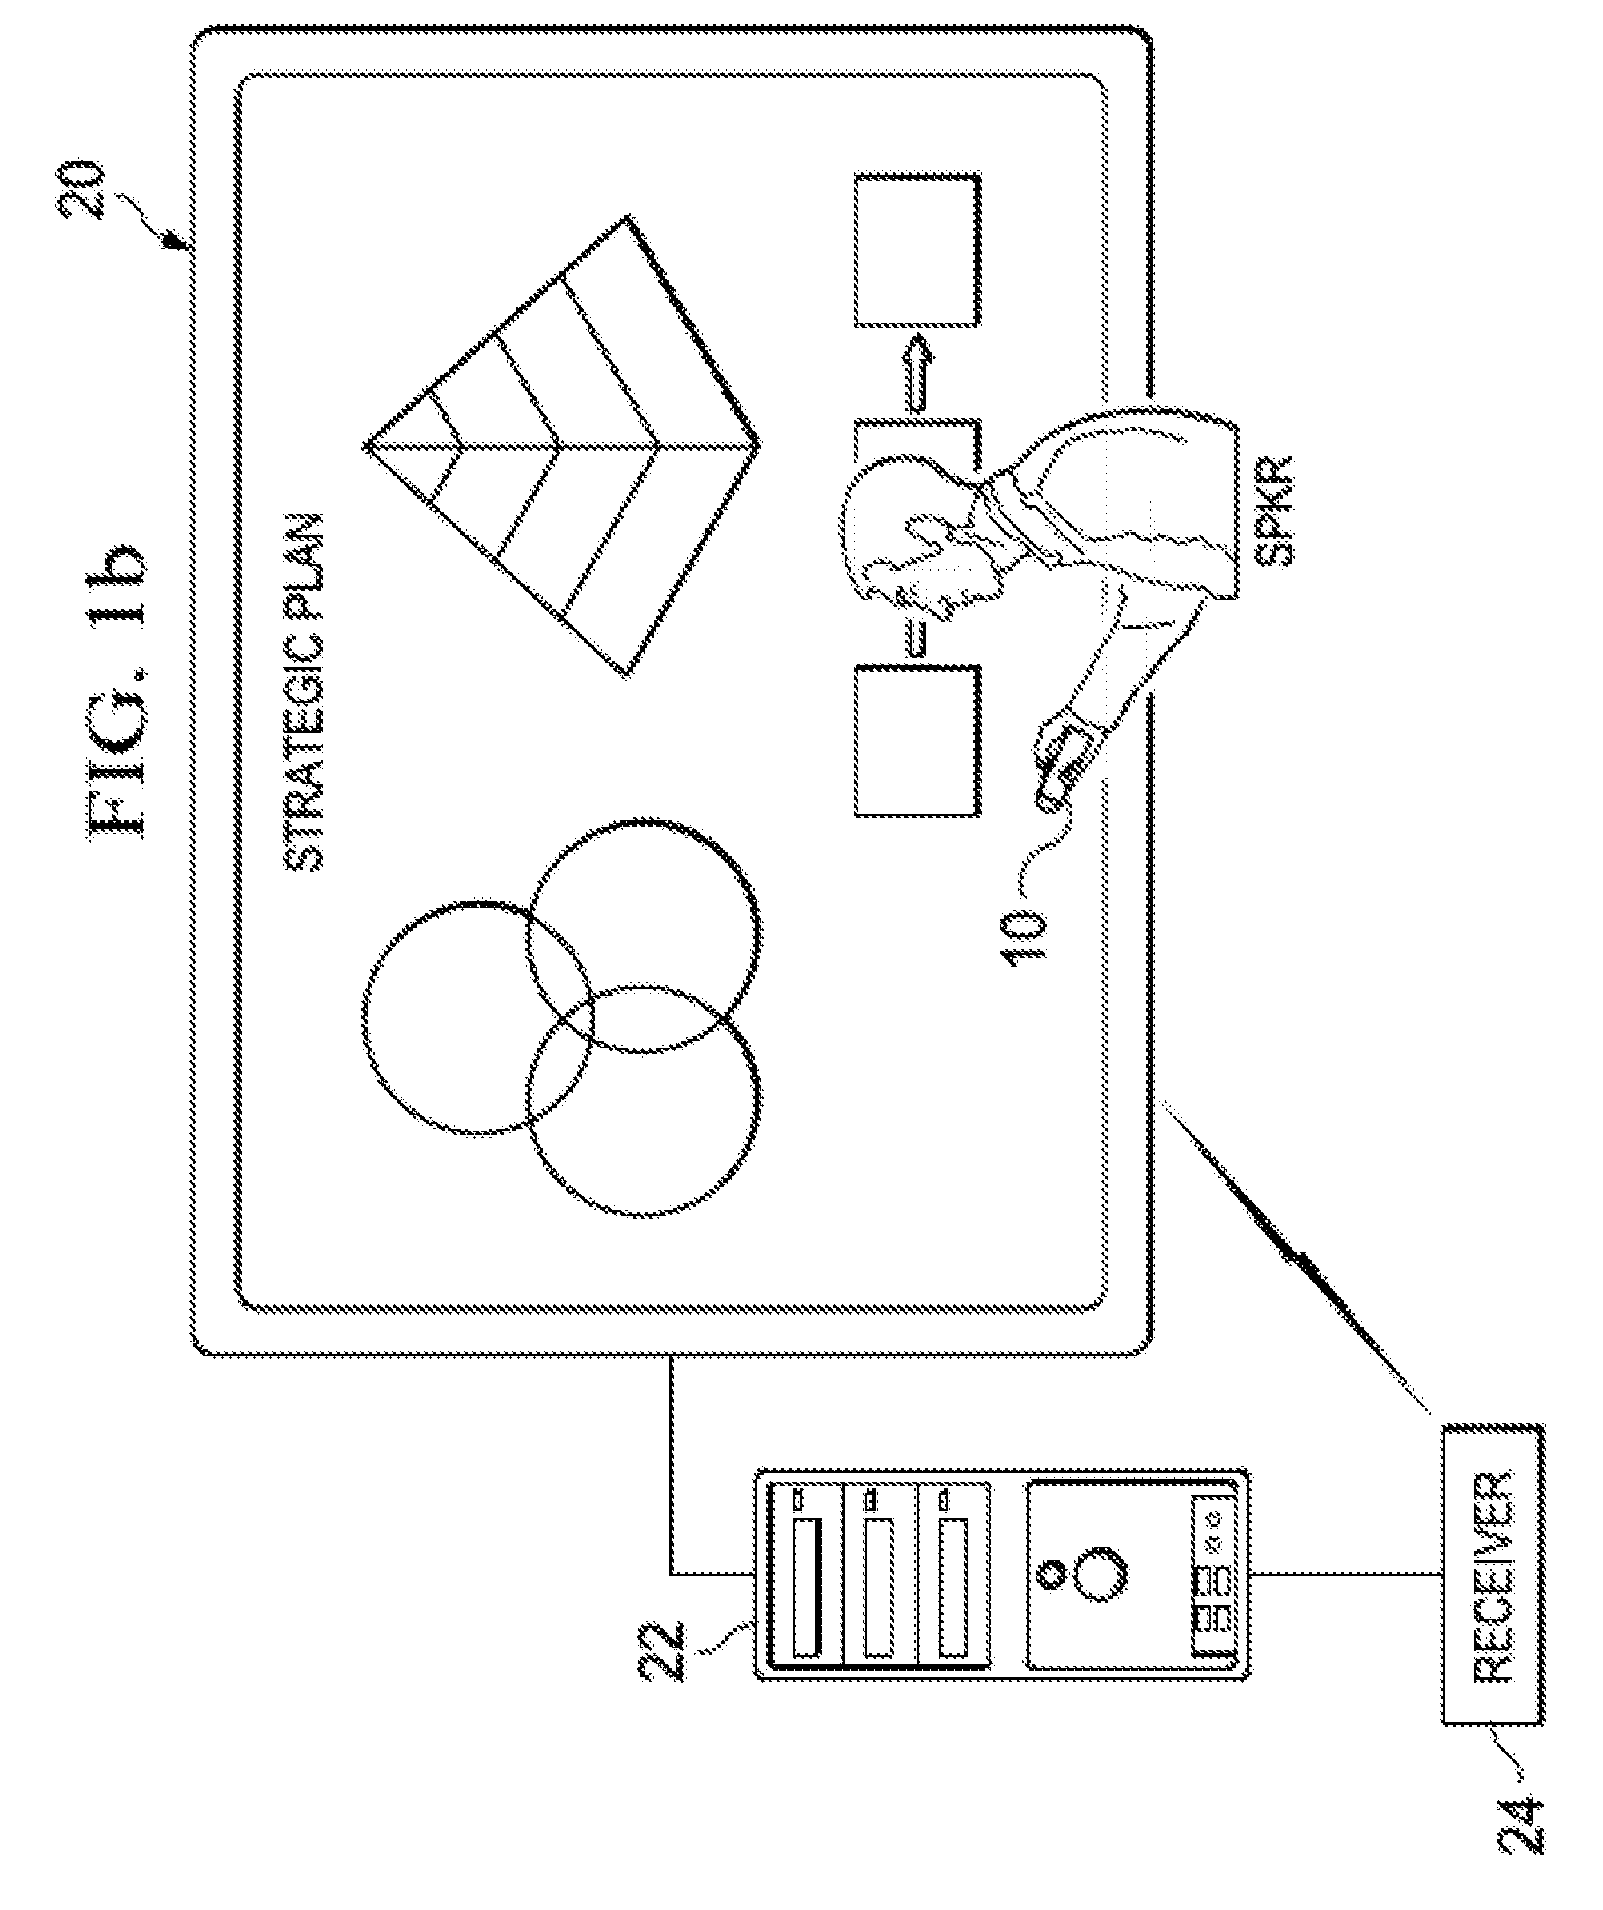 Remote Sensitivity Adjustment in an Interactive Display System